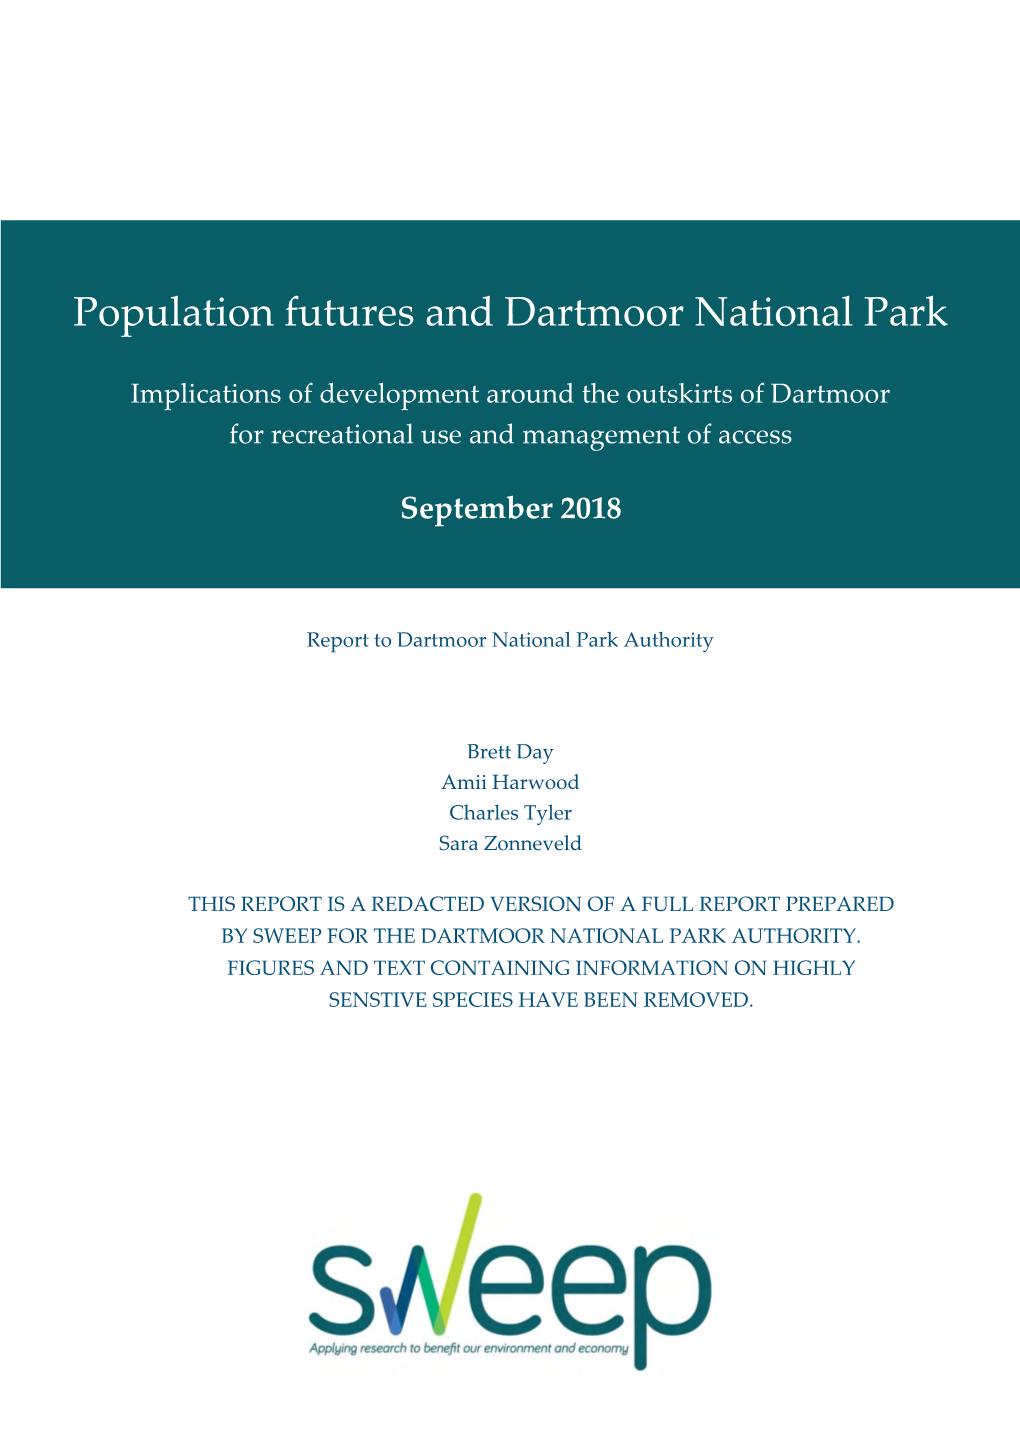 Population Futures and Dartmoor National Park